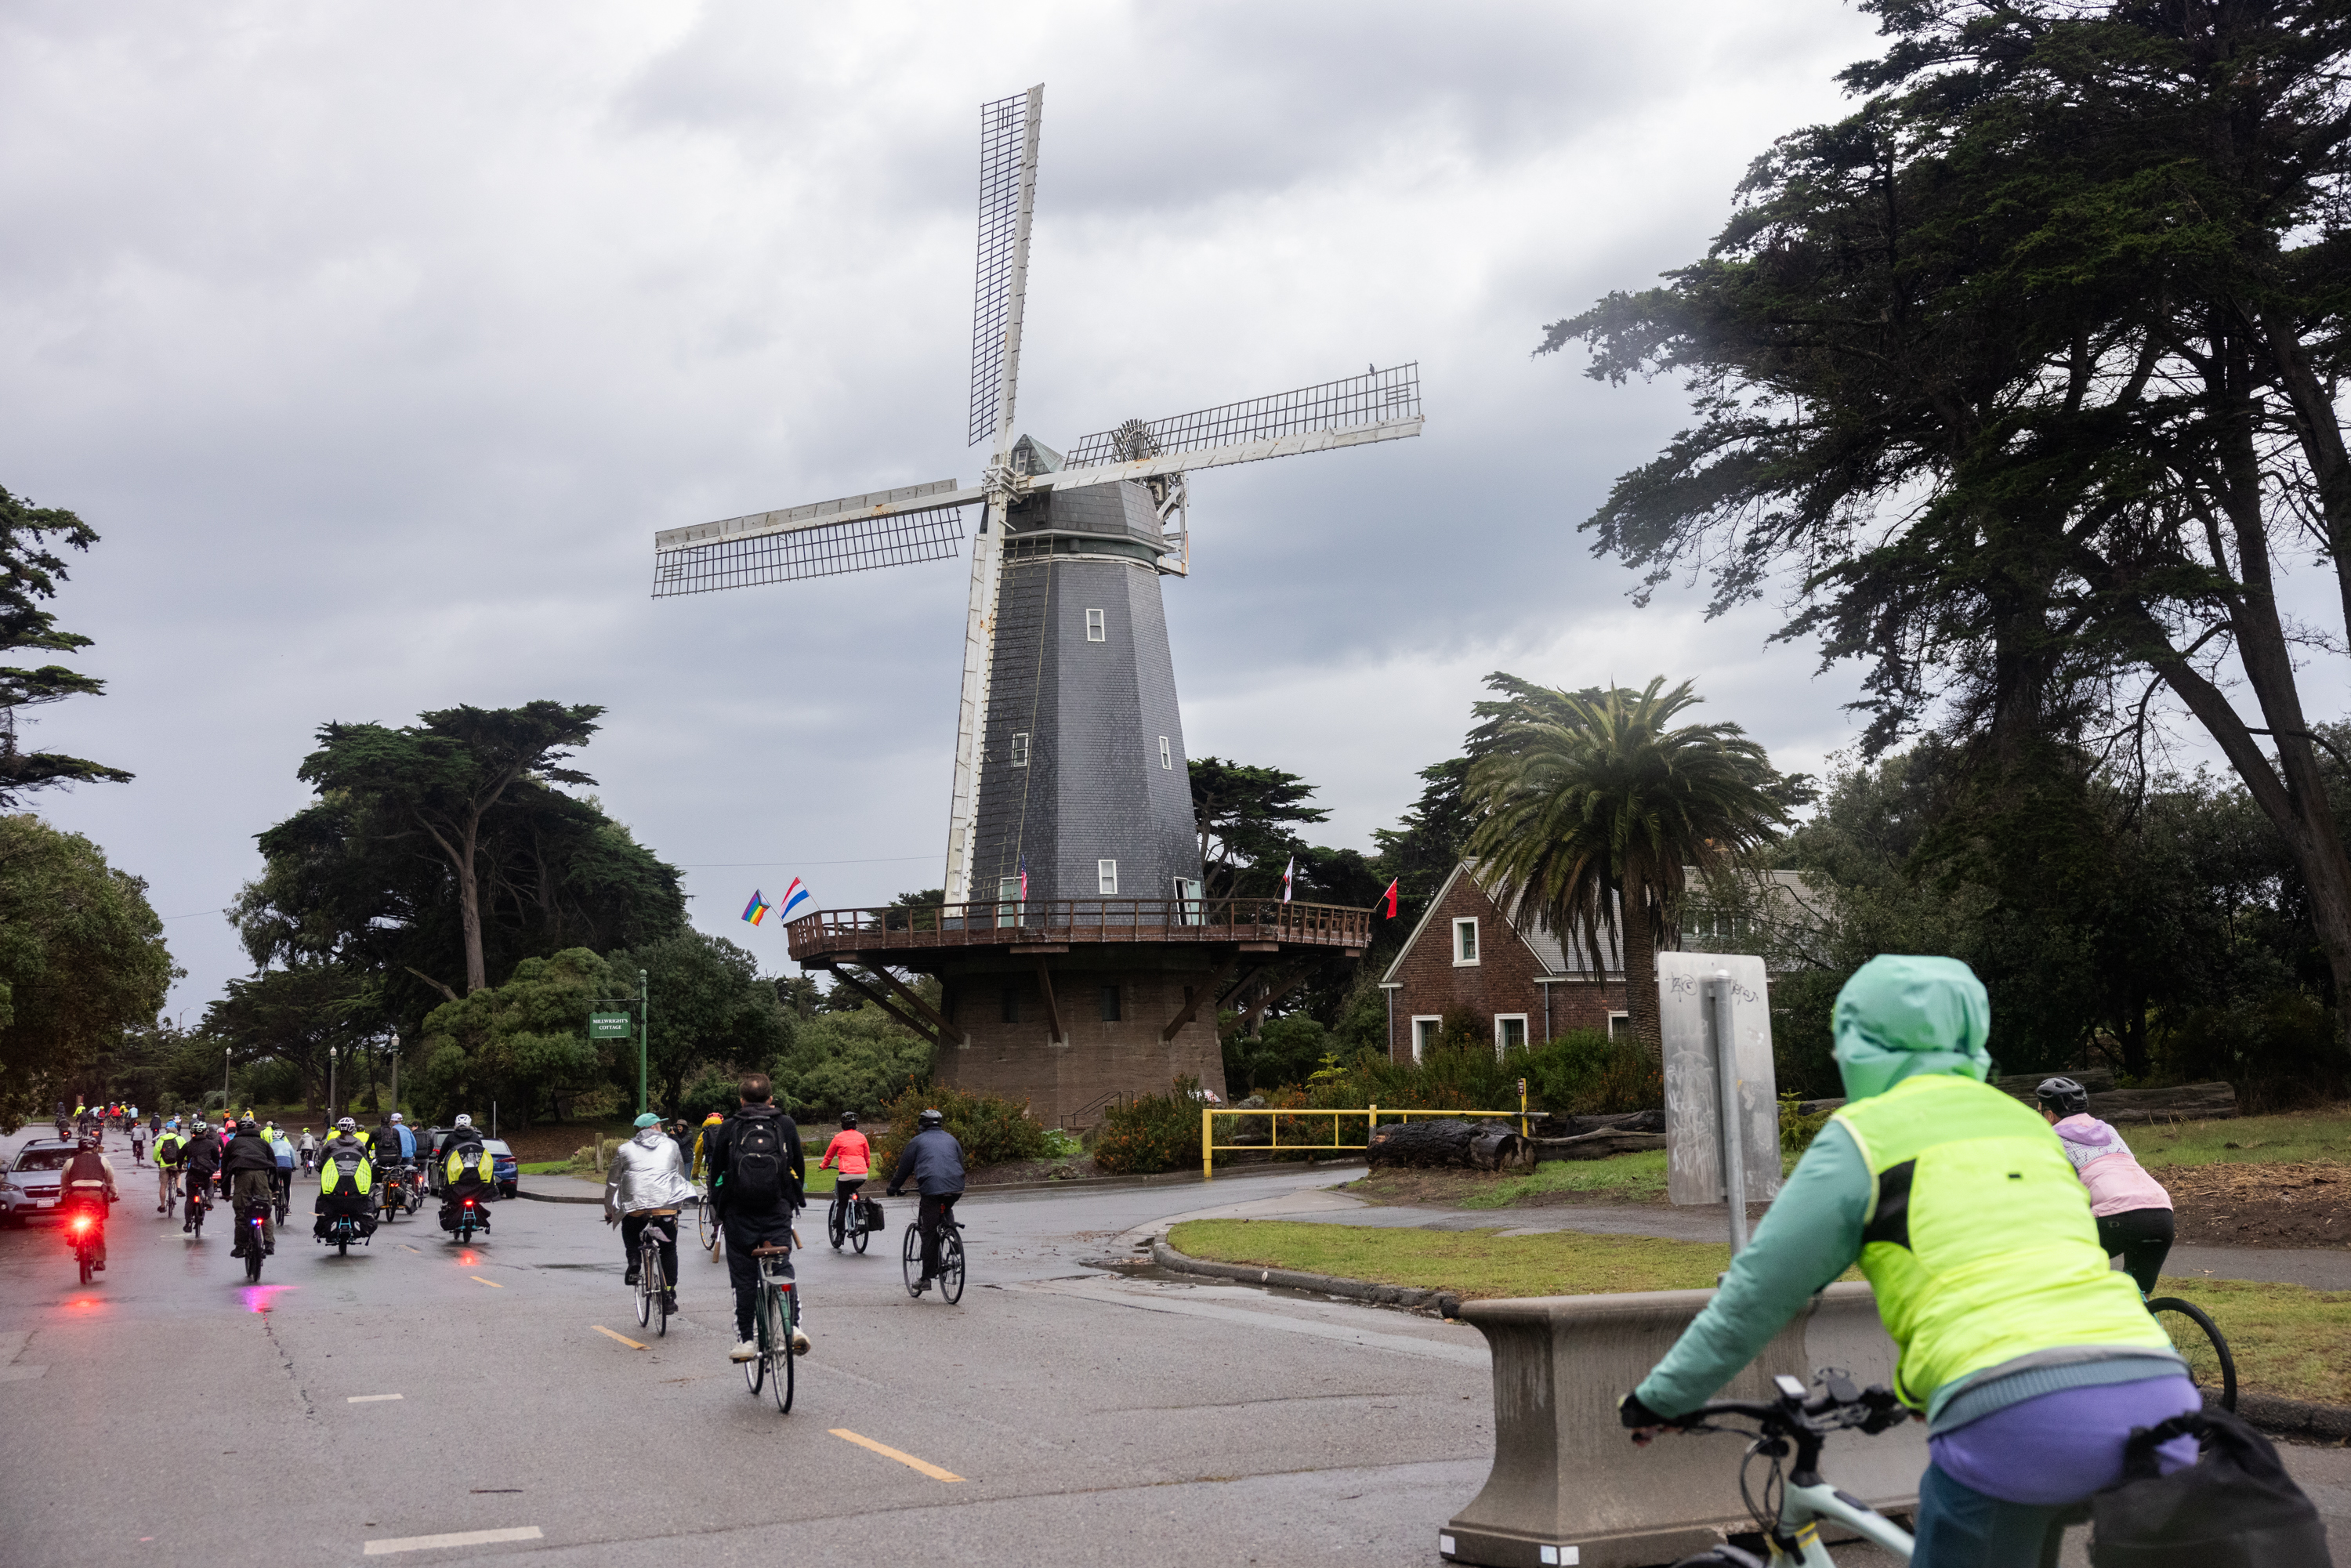 A group of people on bikes pass by Queen Wihelmina Garden in the rain.